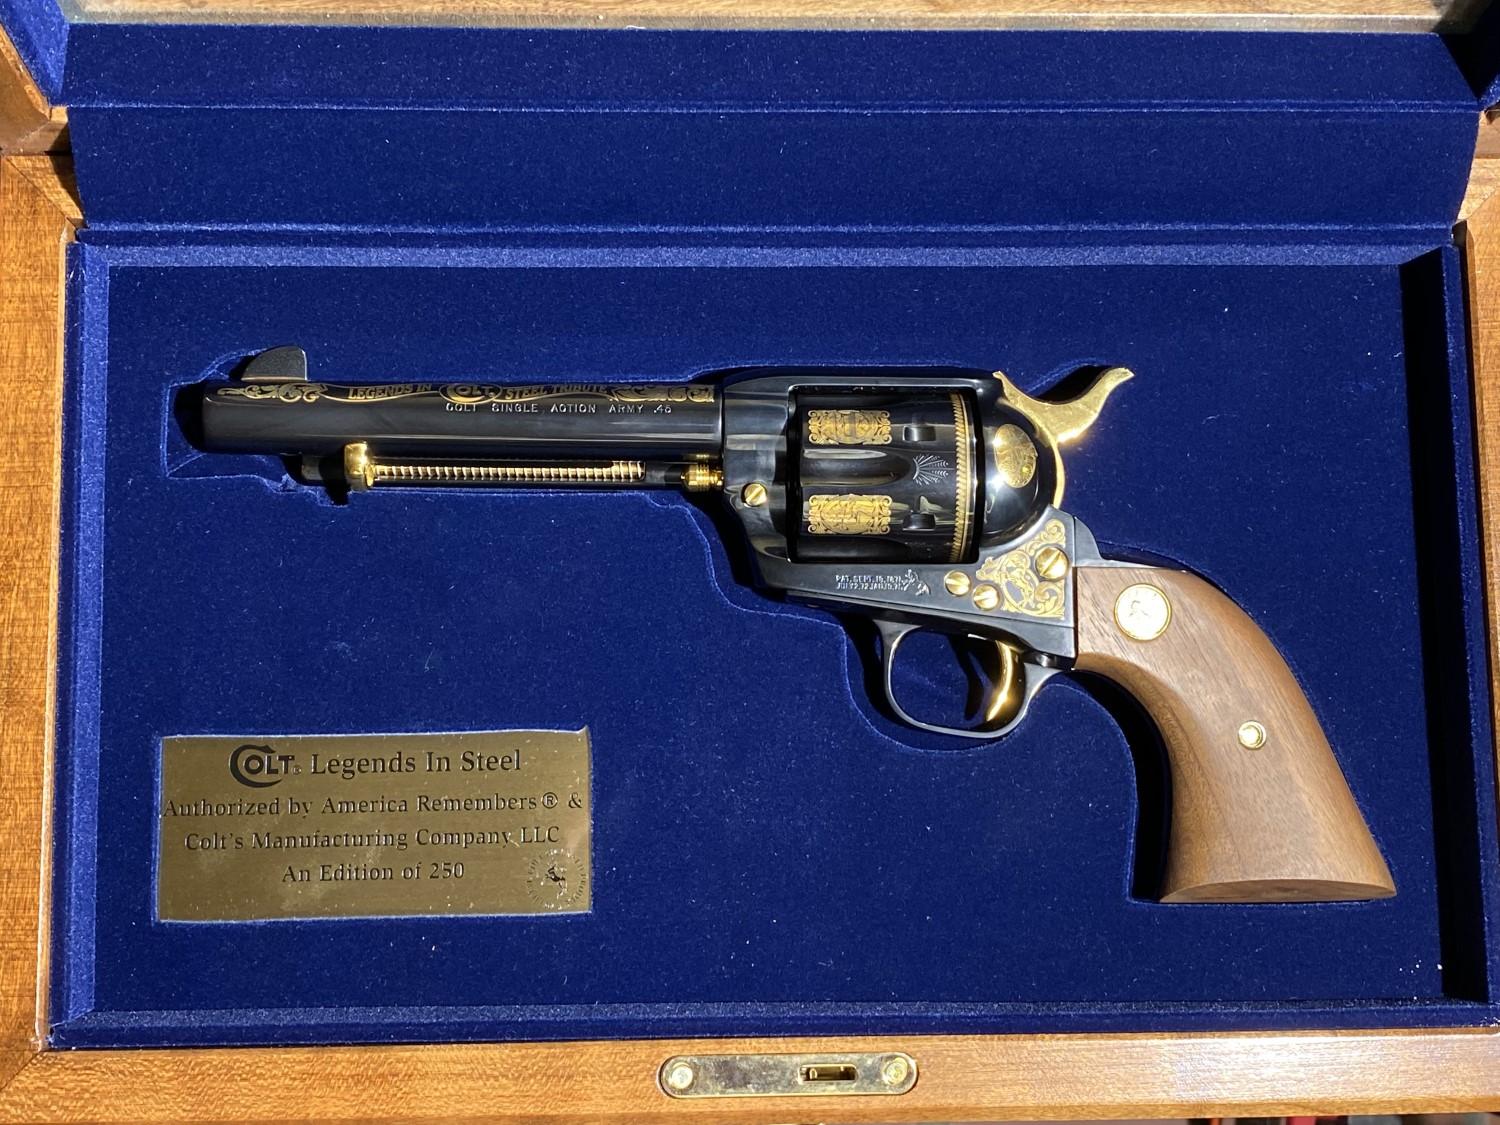 Colt Single Action Army Revolver Edition of 250 by America Remembers